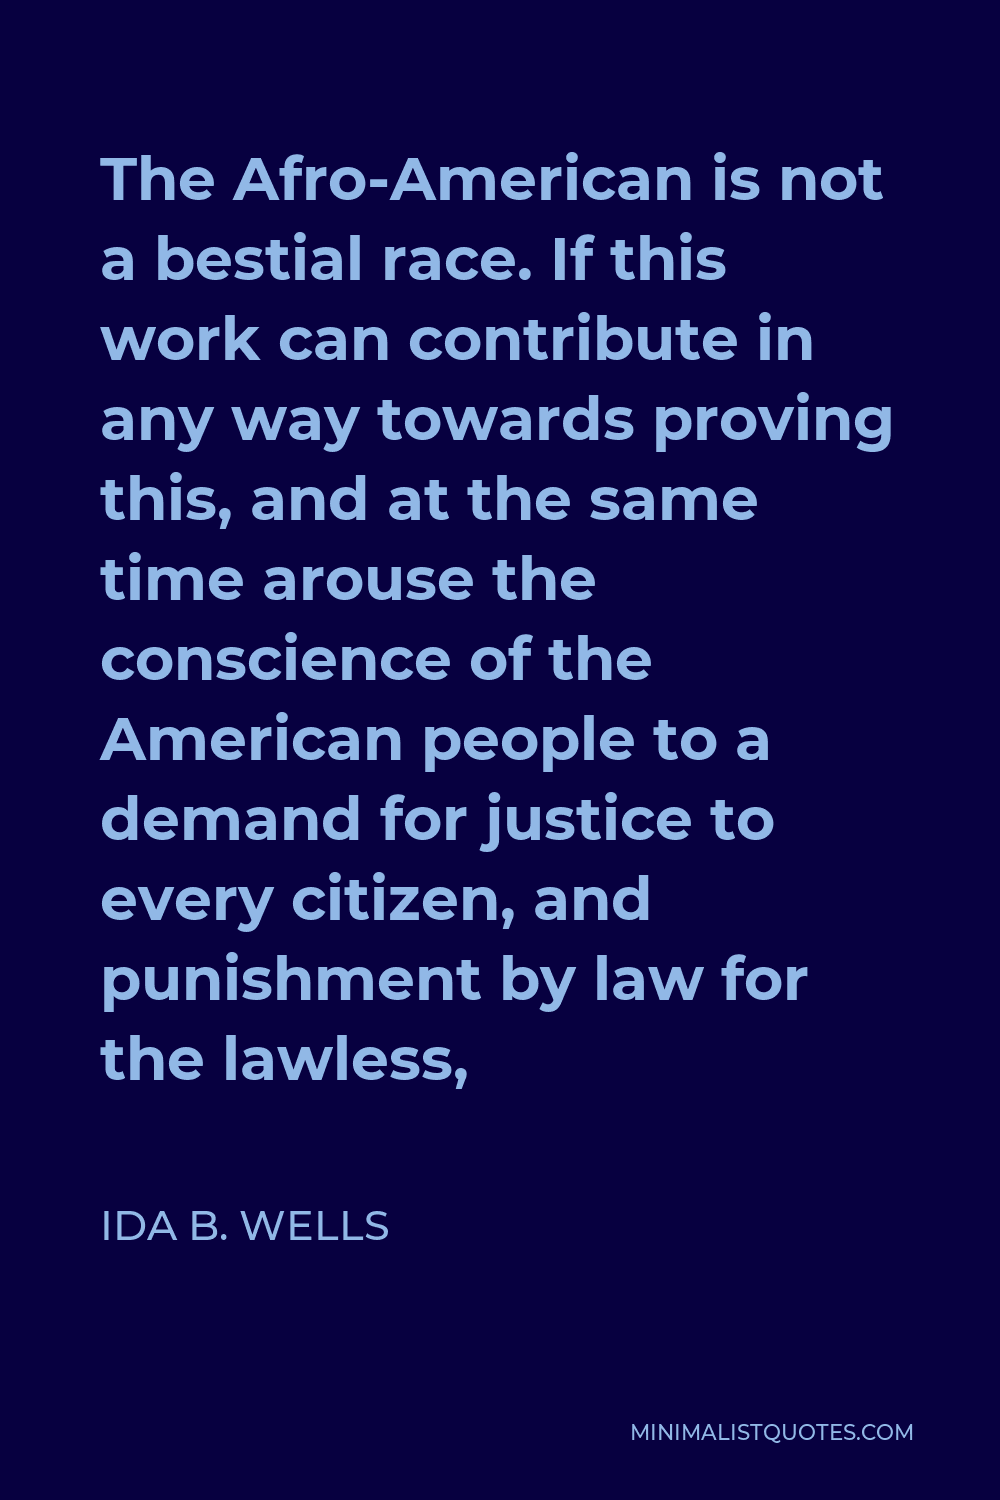 Ida B. Wells Quote - The Afro-American is not a bestial race. If this work can contribute in any way towards proving this, and at the same time arouse the conscience of the American people to a demand for justice to every citizen, and punishment by law for the lawless,